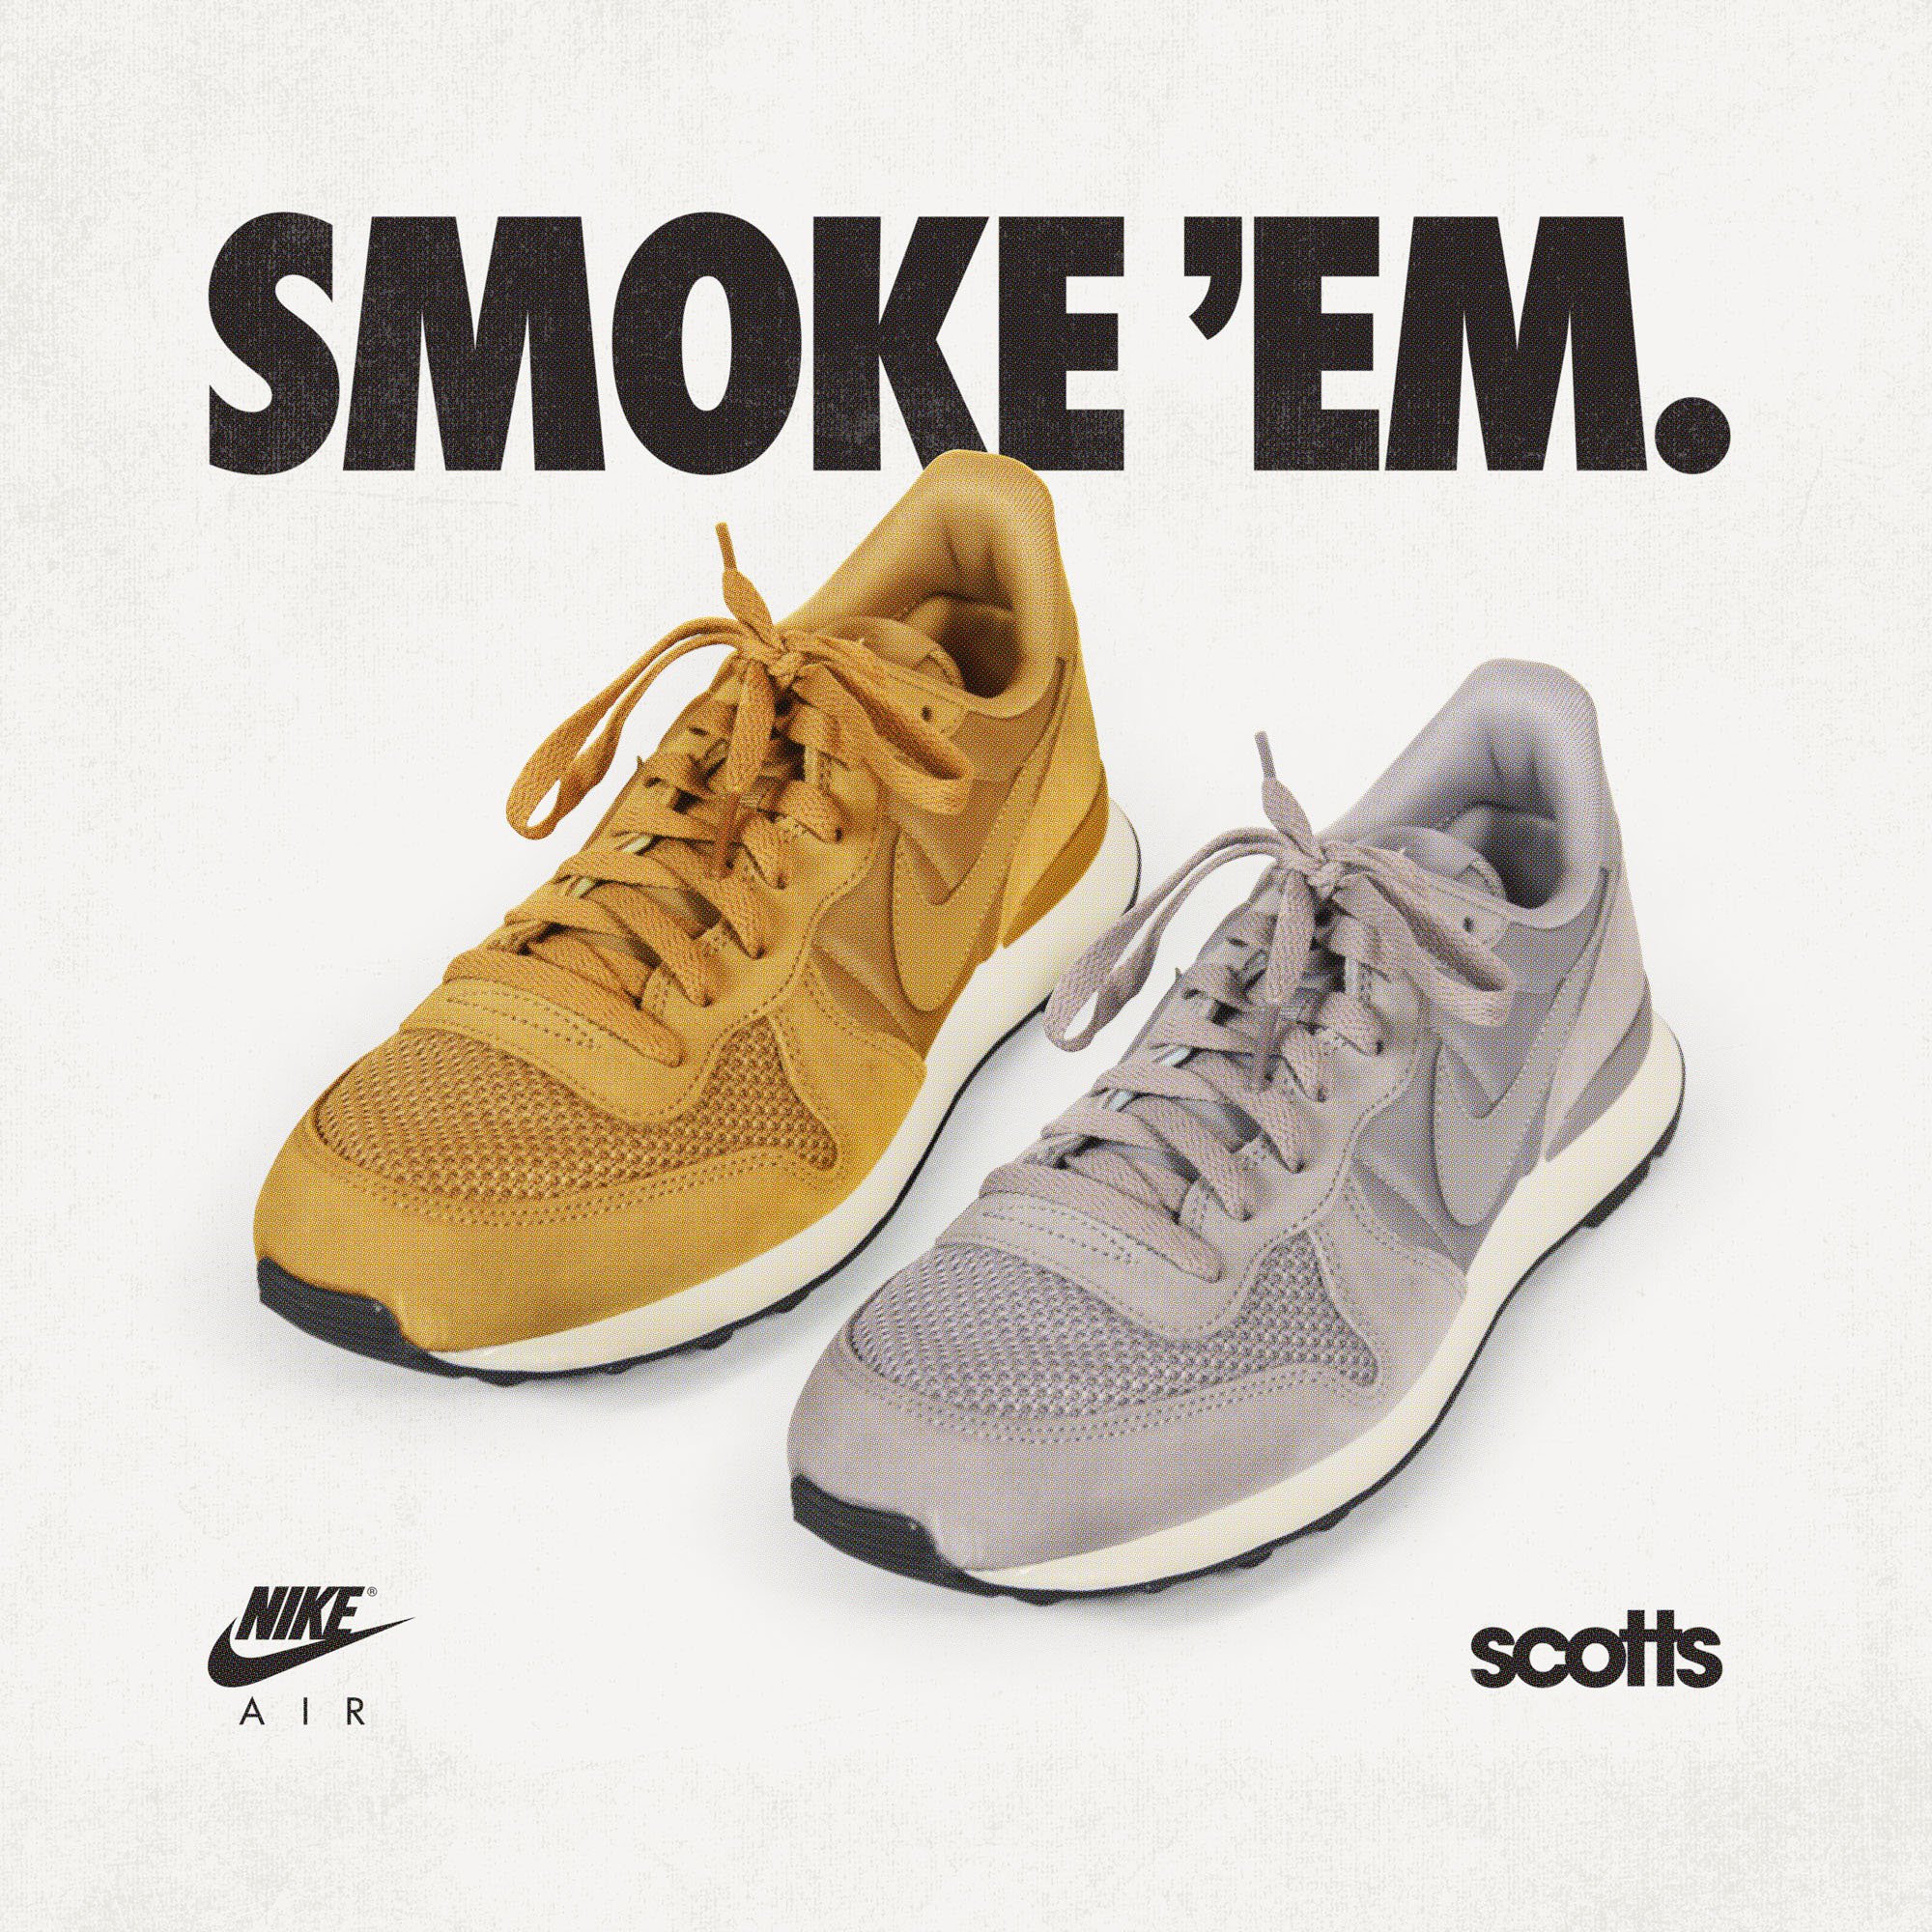 scotts Twitter: "Smoke 'em if got 'em. world's at your feet in a pair of Internationalist. Who's a fan? Get them here: https://t.co/HsNs604b3R #scottsmenswear #Nike #NikeInternationalist #Huarache #NikeVortex